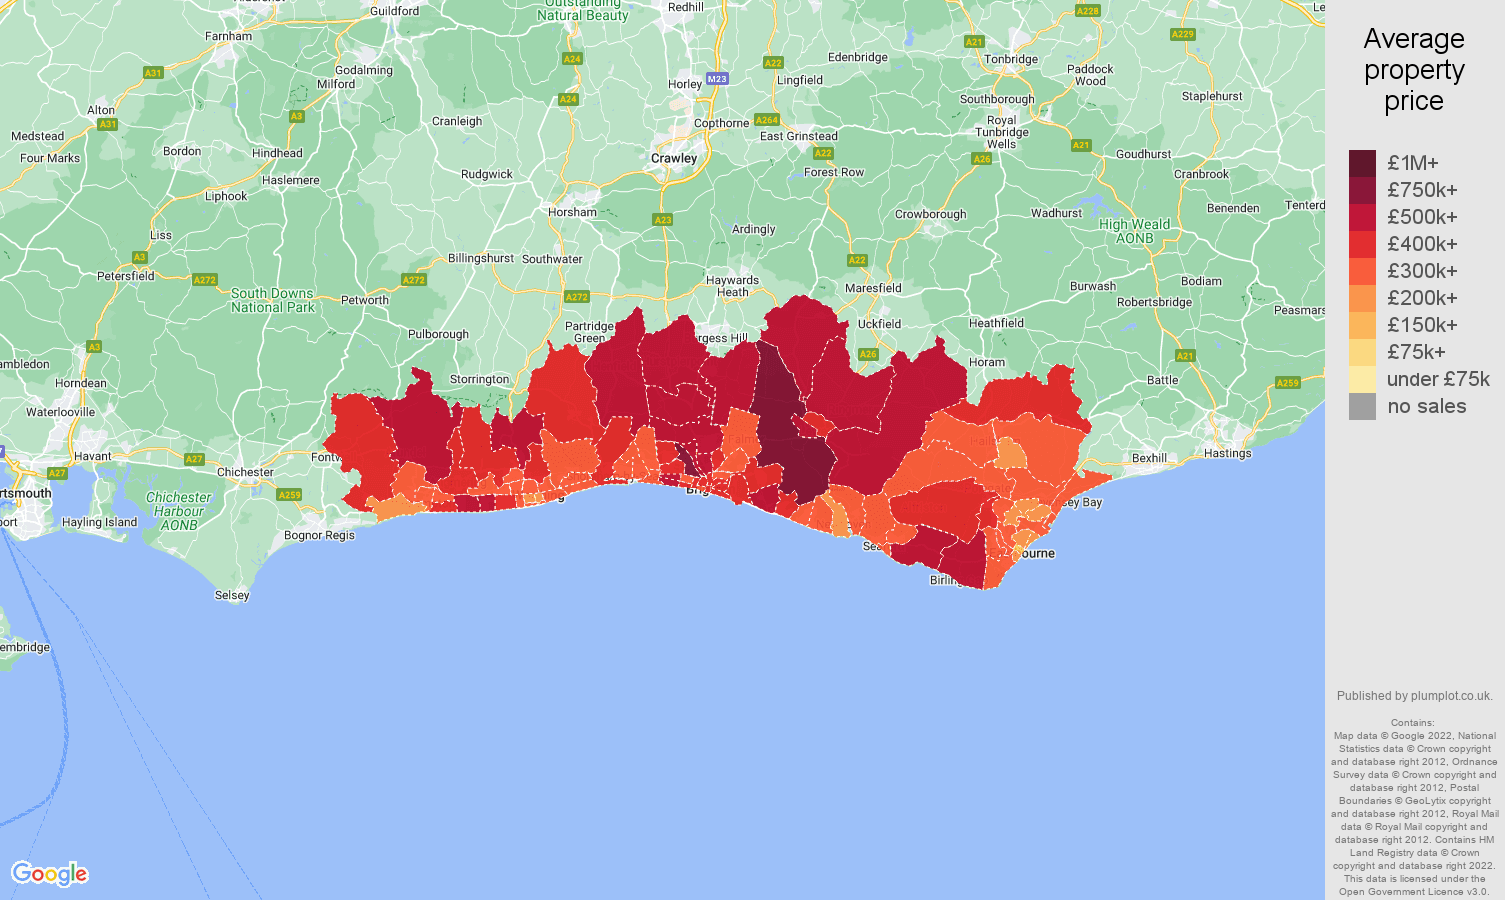 Brighton property prices by postcode sector